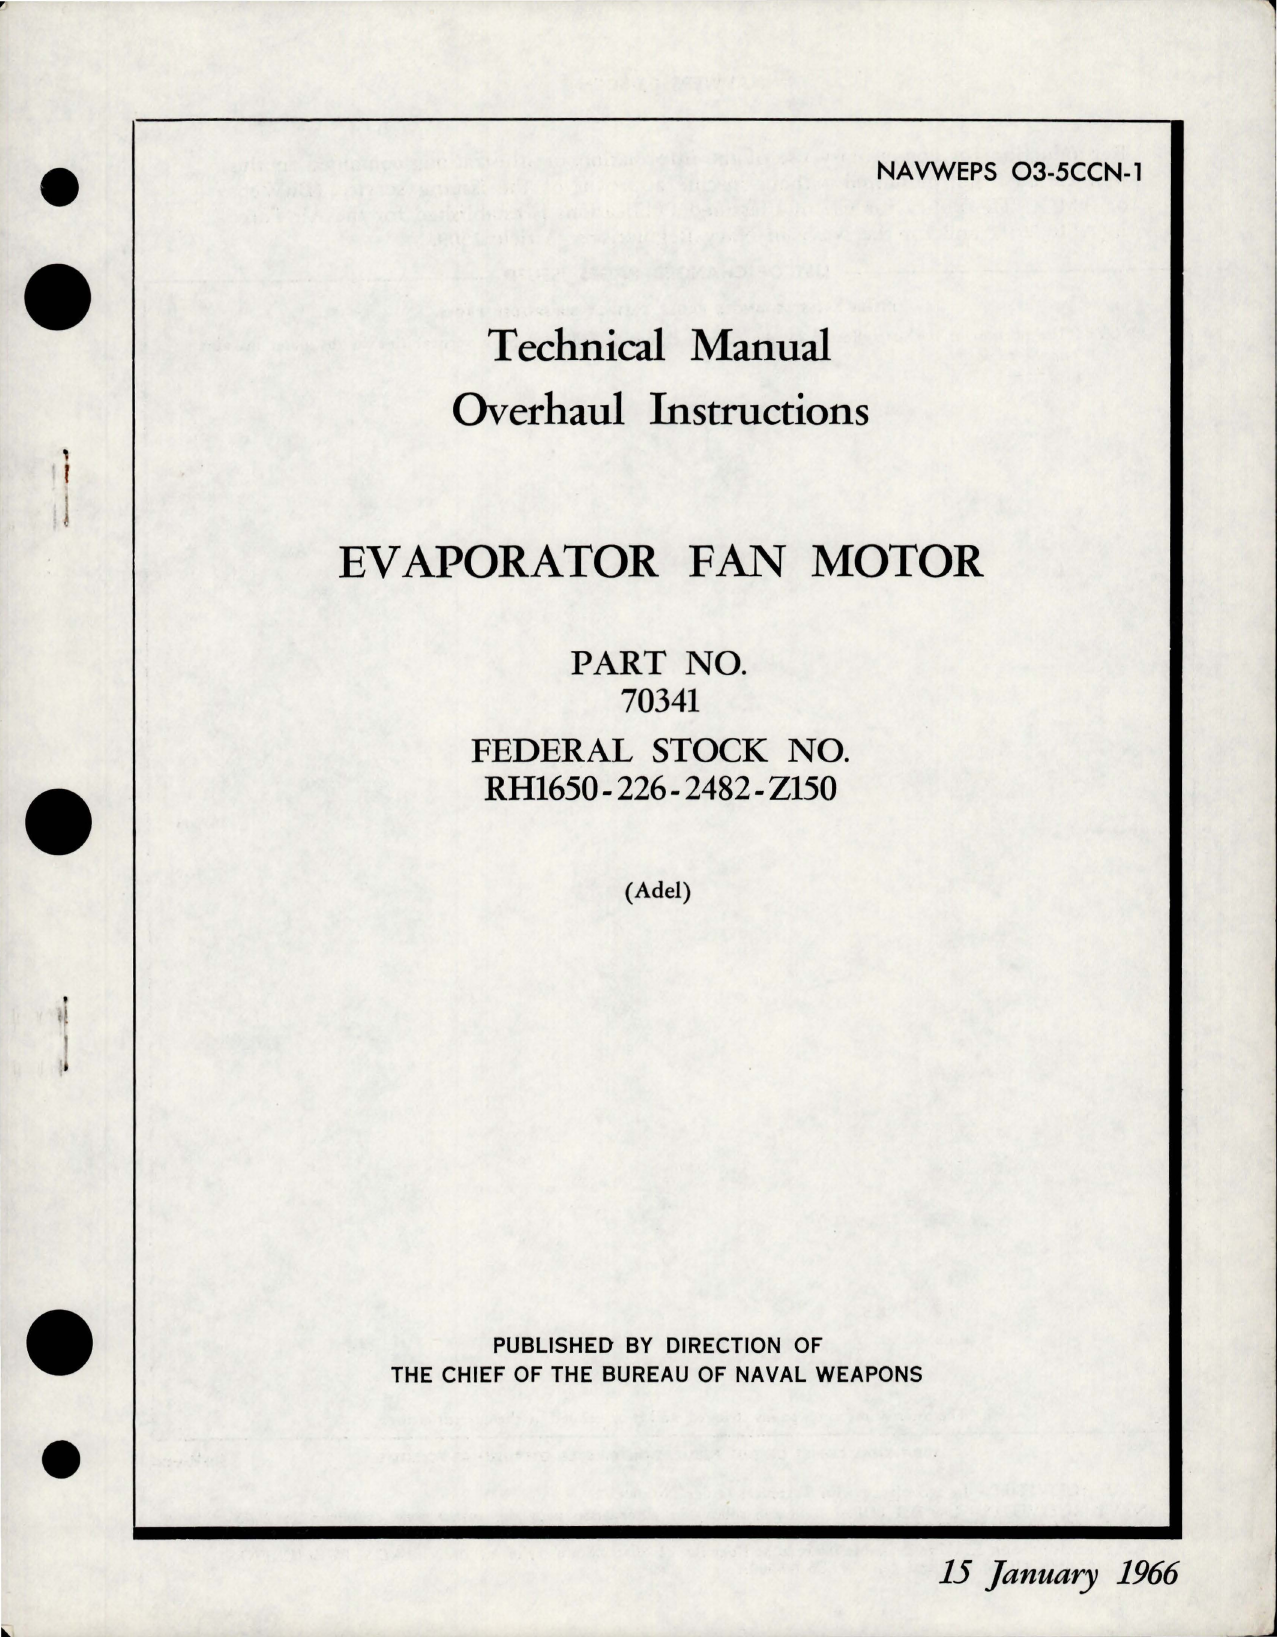 Sample page 1 from AirCorps Library document: Overhaul Instructions for Evaporator Fan Motor - Part 70341 